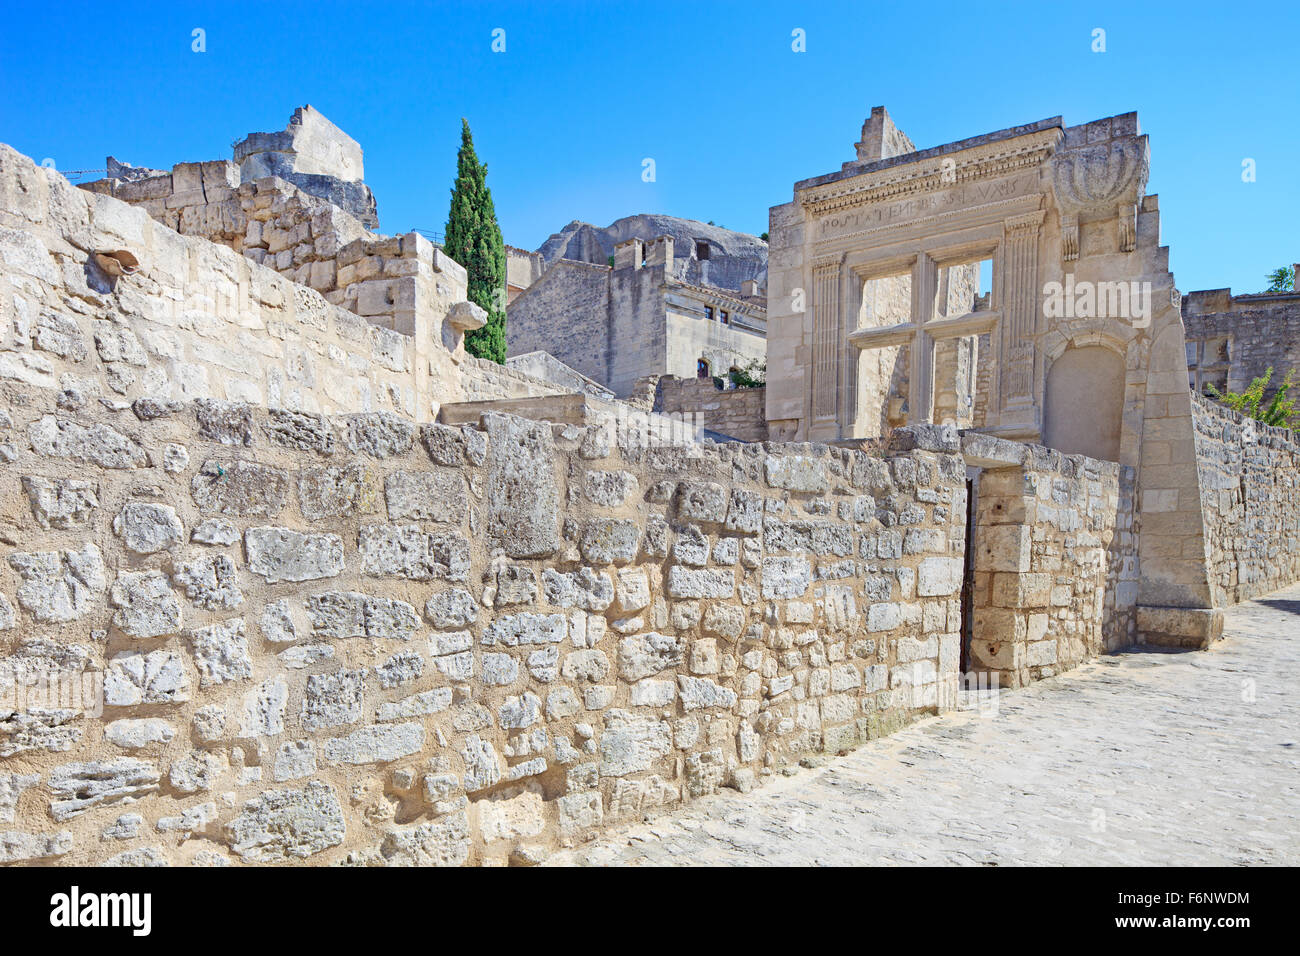 Les Baux de Provence ancient village, old stone wall and ruins on a street. France, Europe. Stock Photo